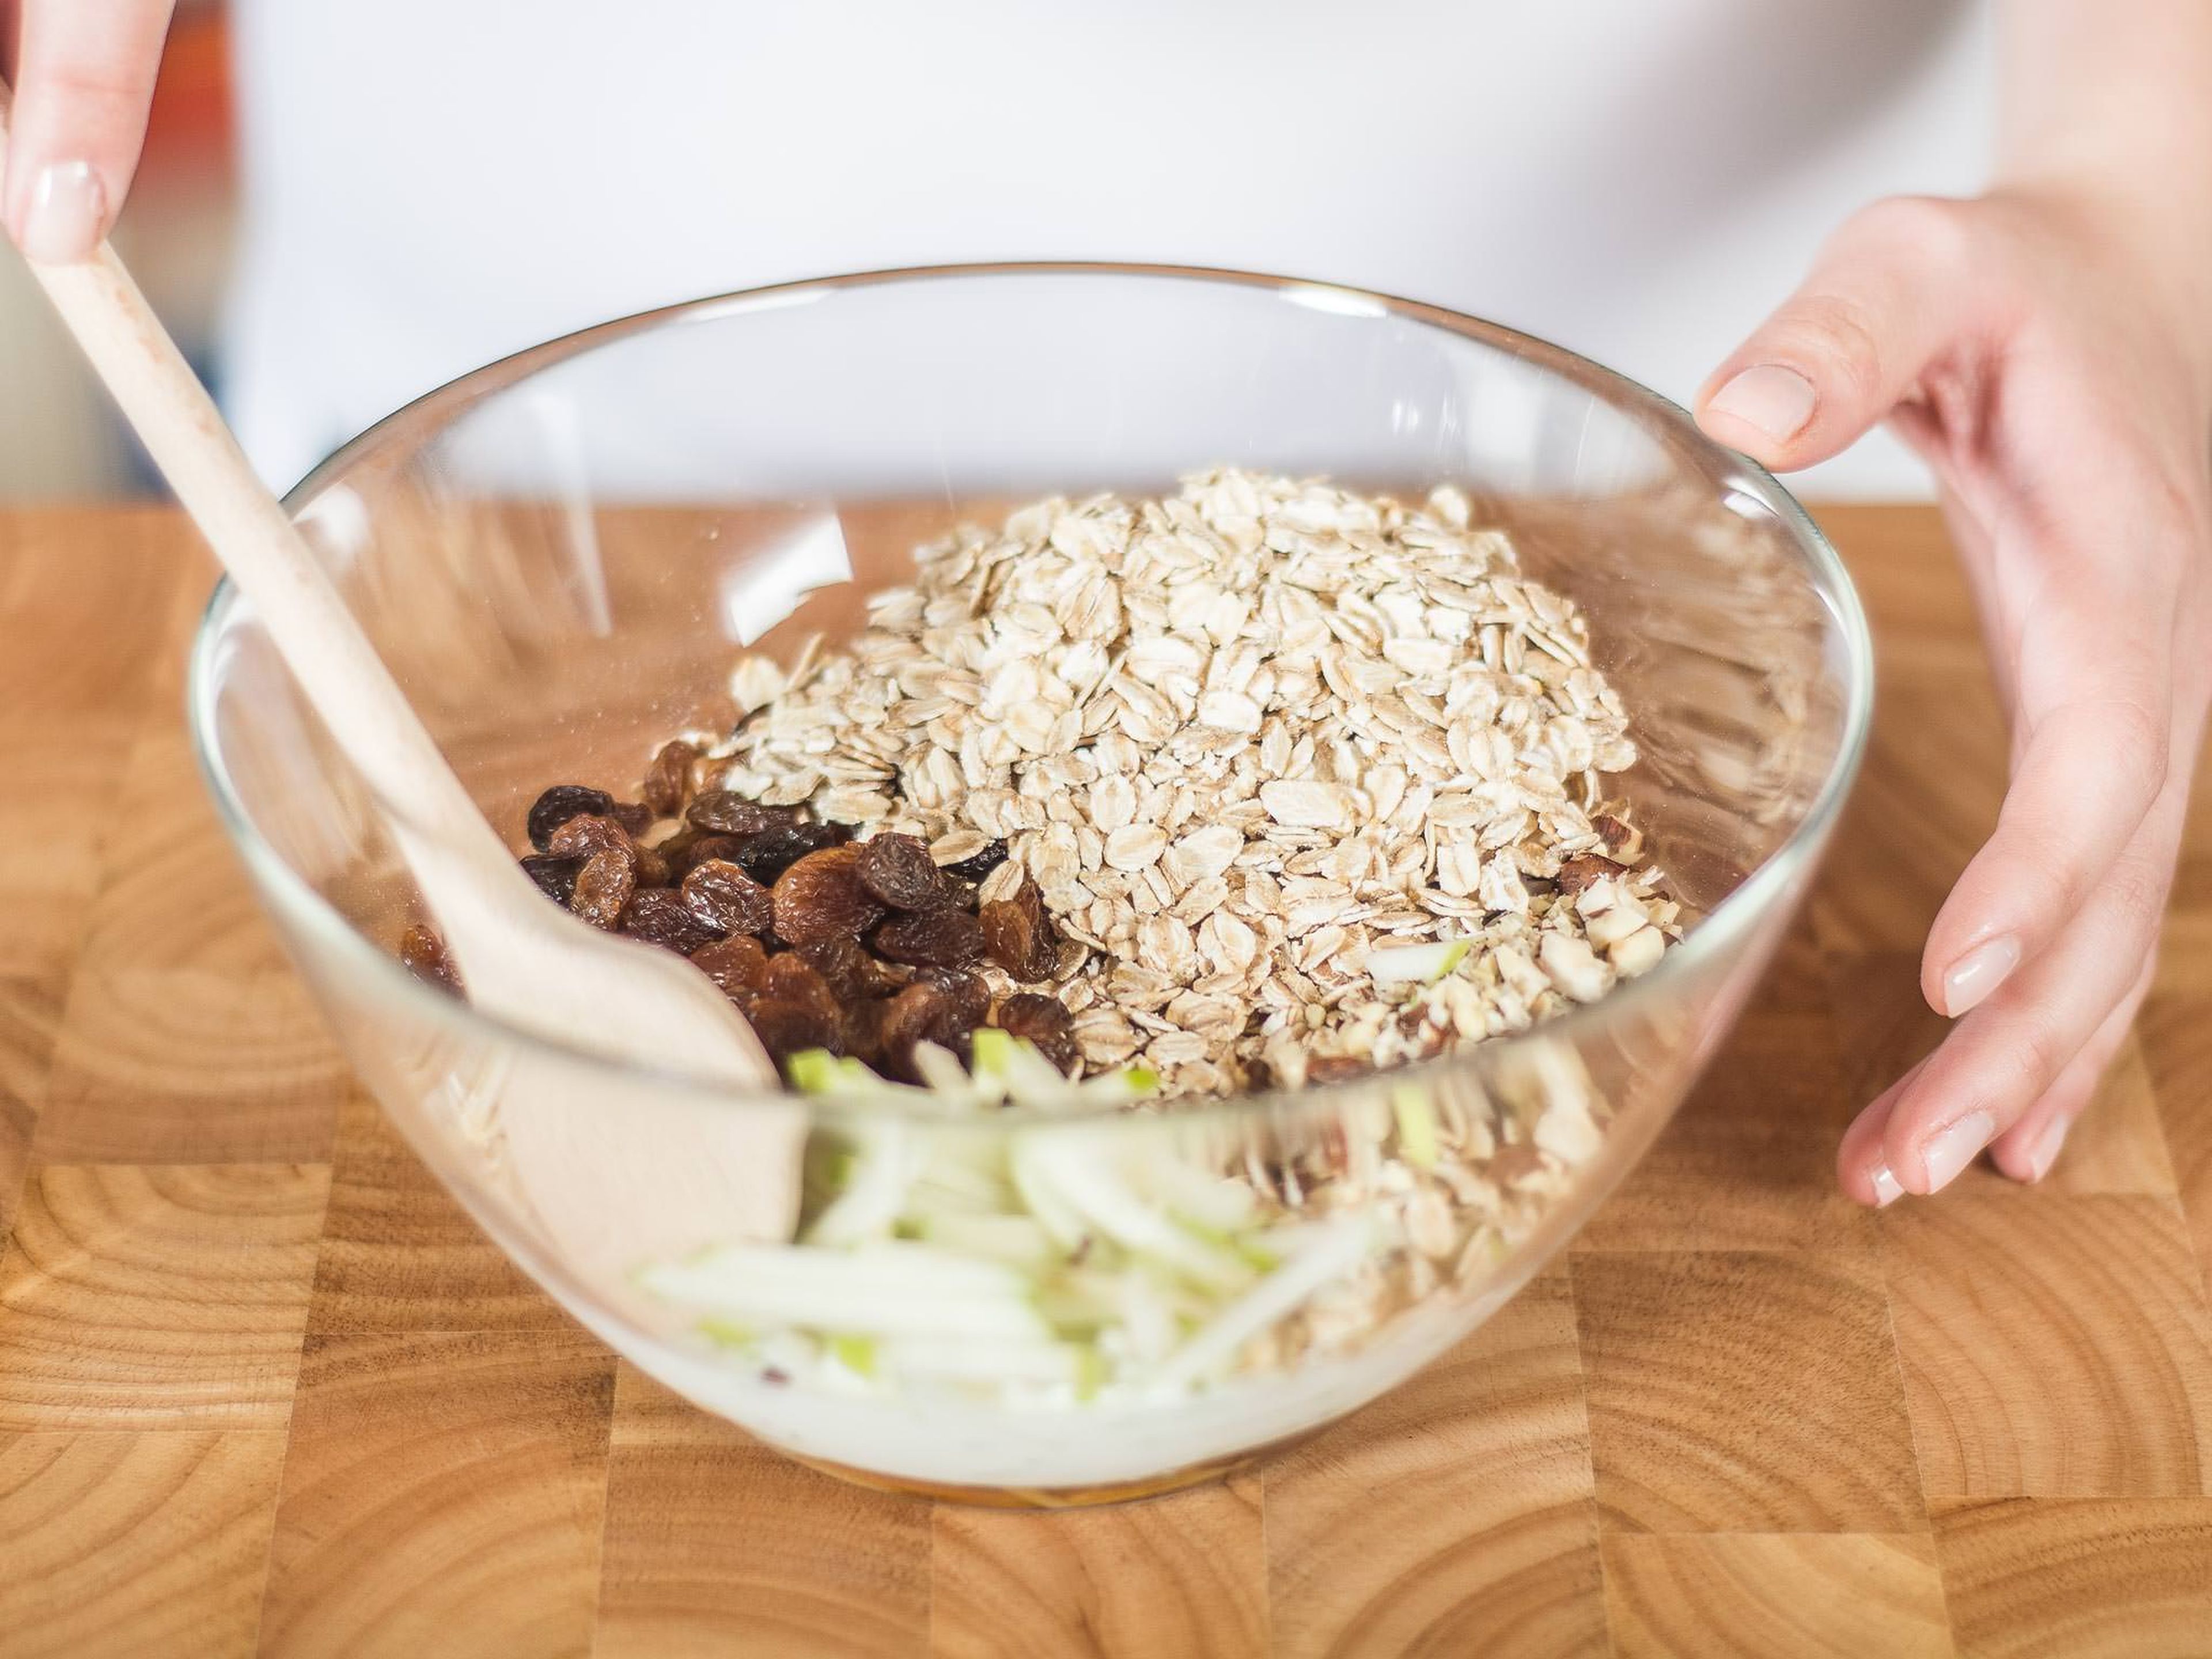 Add apples, hazelnuts, oat flakes, and sultanas to the blended yogurt. Steep for a few hours or overnight before serving to allow the oats to become soft.